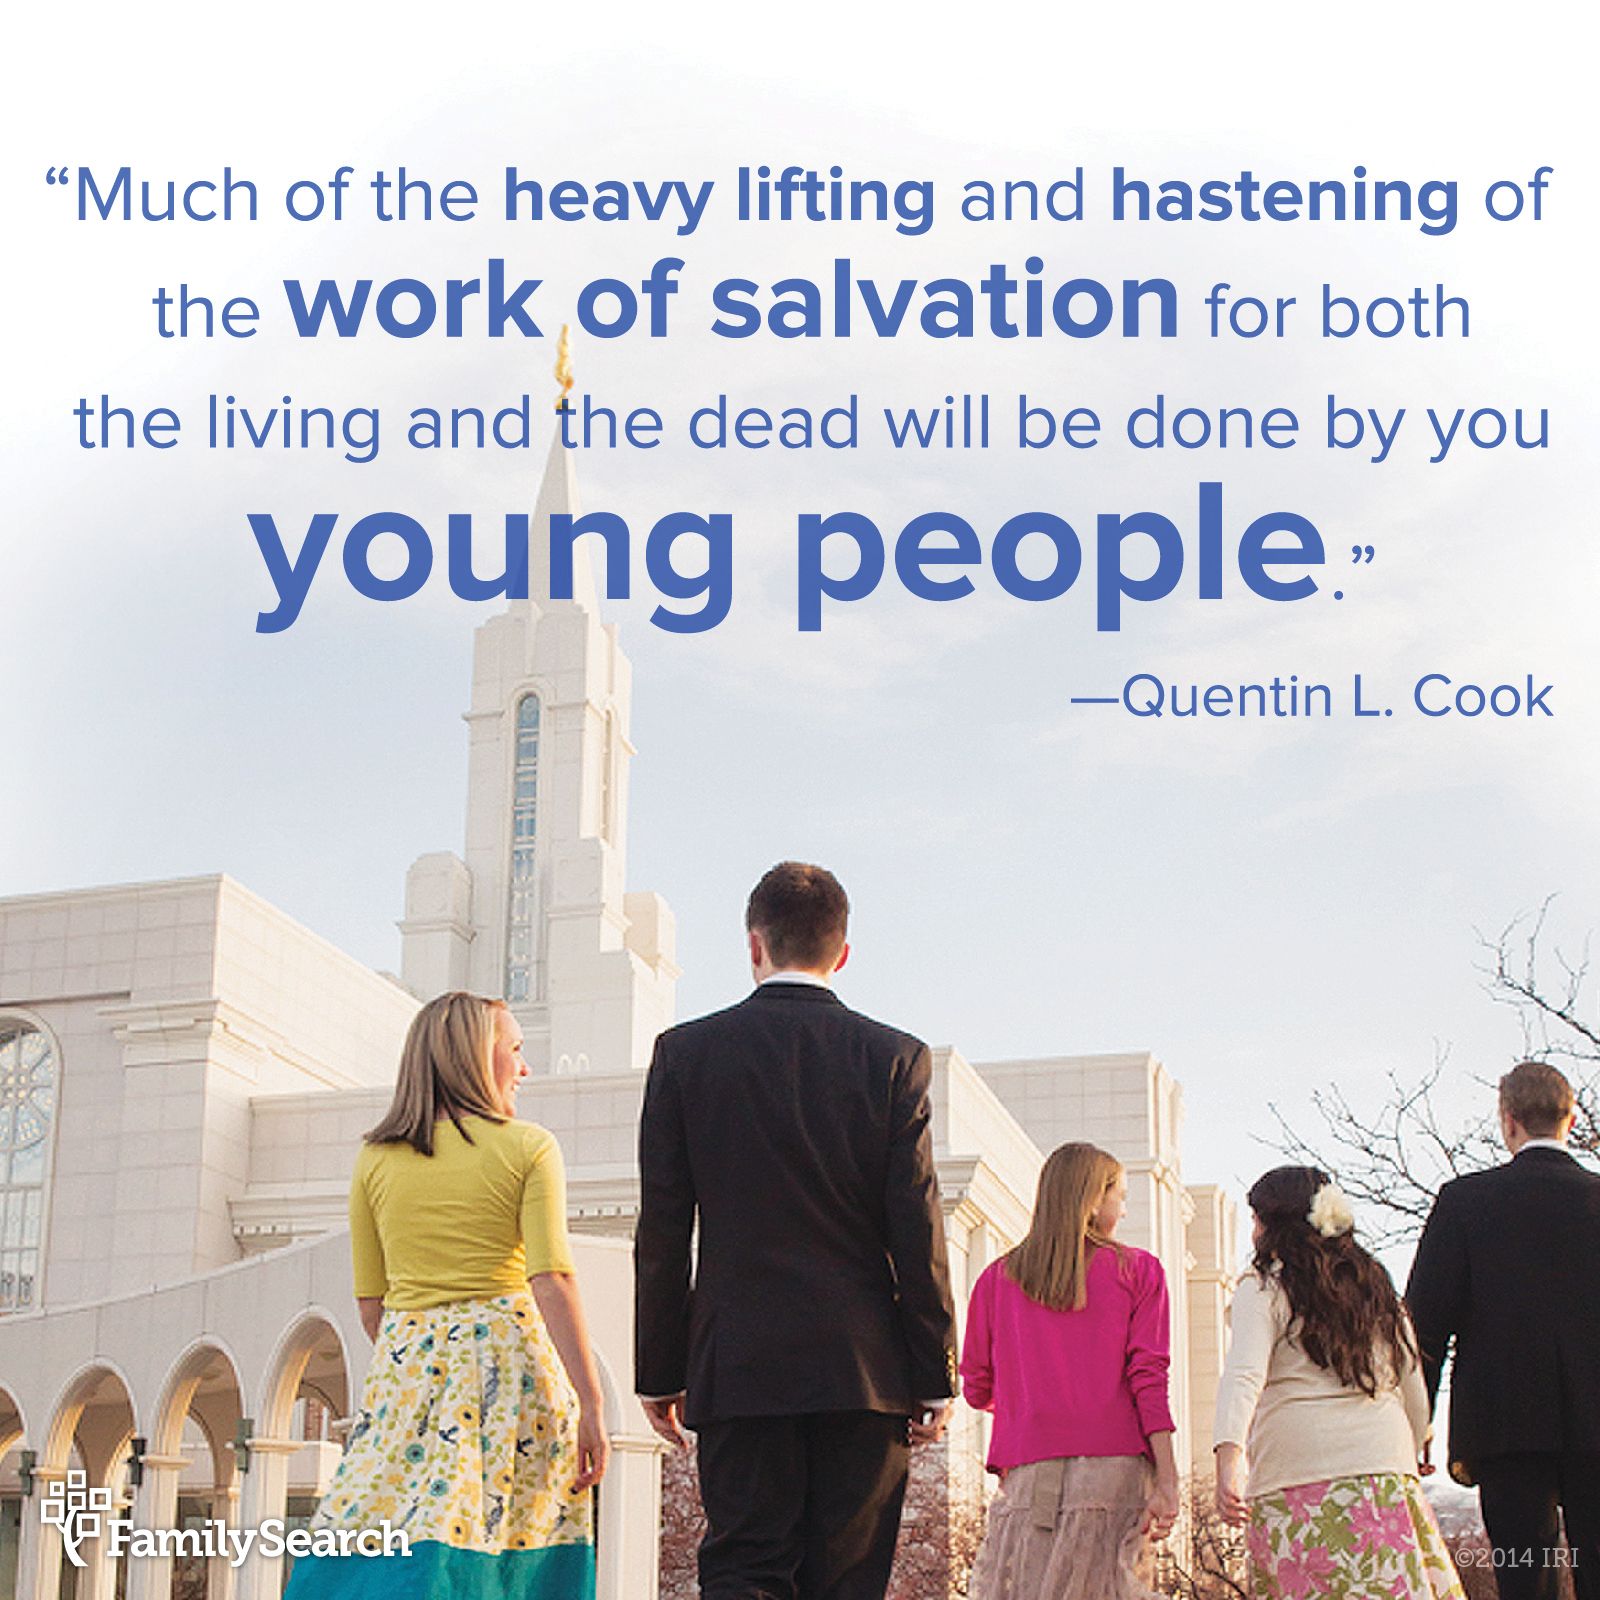 “Much of the heavy lifting and hastening of the work of salvation for both the living and the dead will be done by you young people.”—Elder Quentin L. Cook, “Roots and Branches.” Learn how to find a family name to take to the temple by accepting the Youth Temple Challenge.